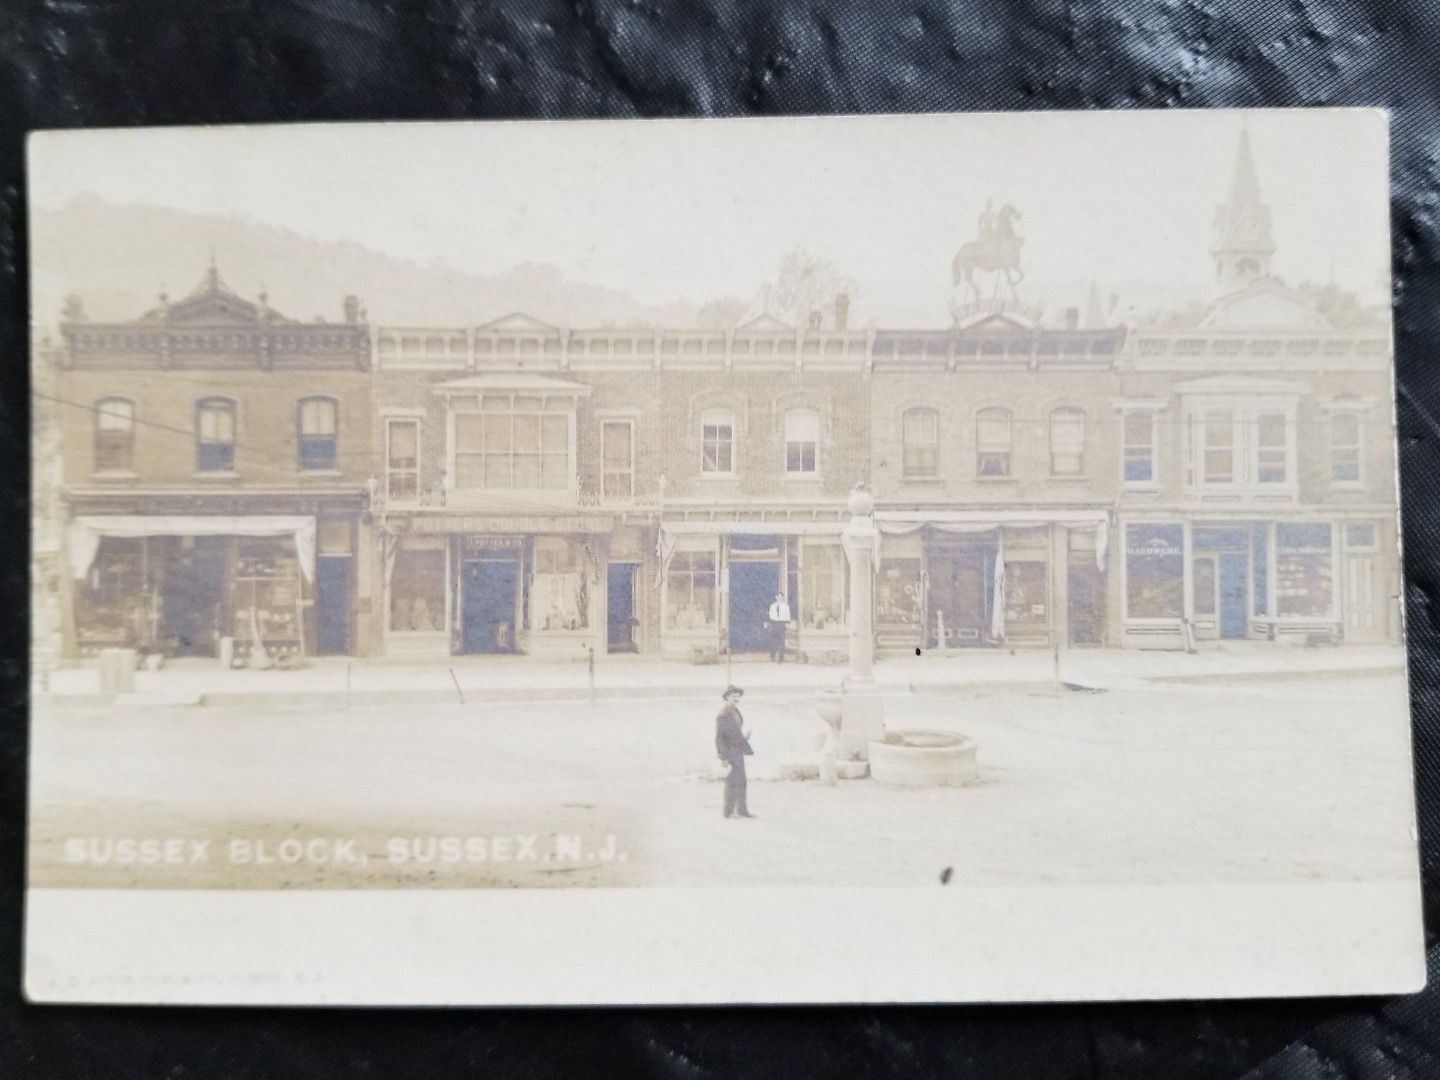 Sussex - very faded image of commercial block - c 1910